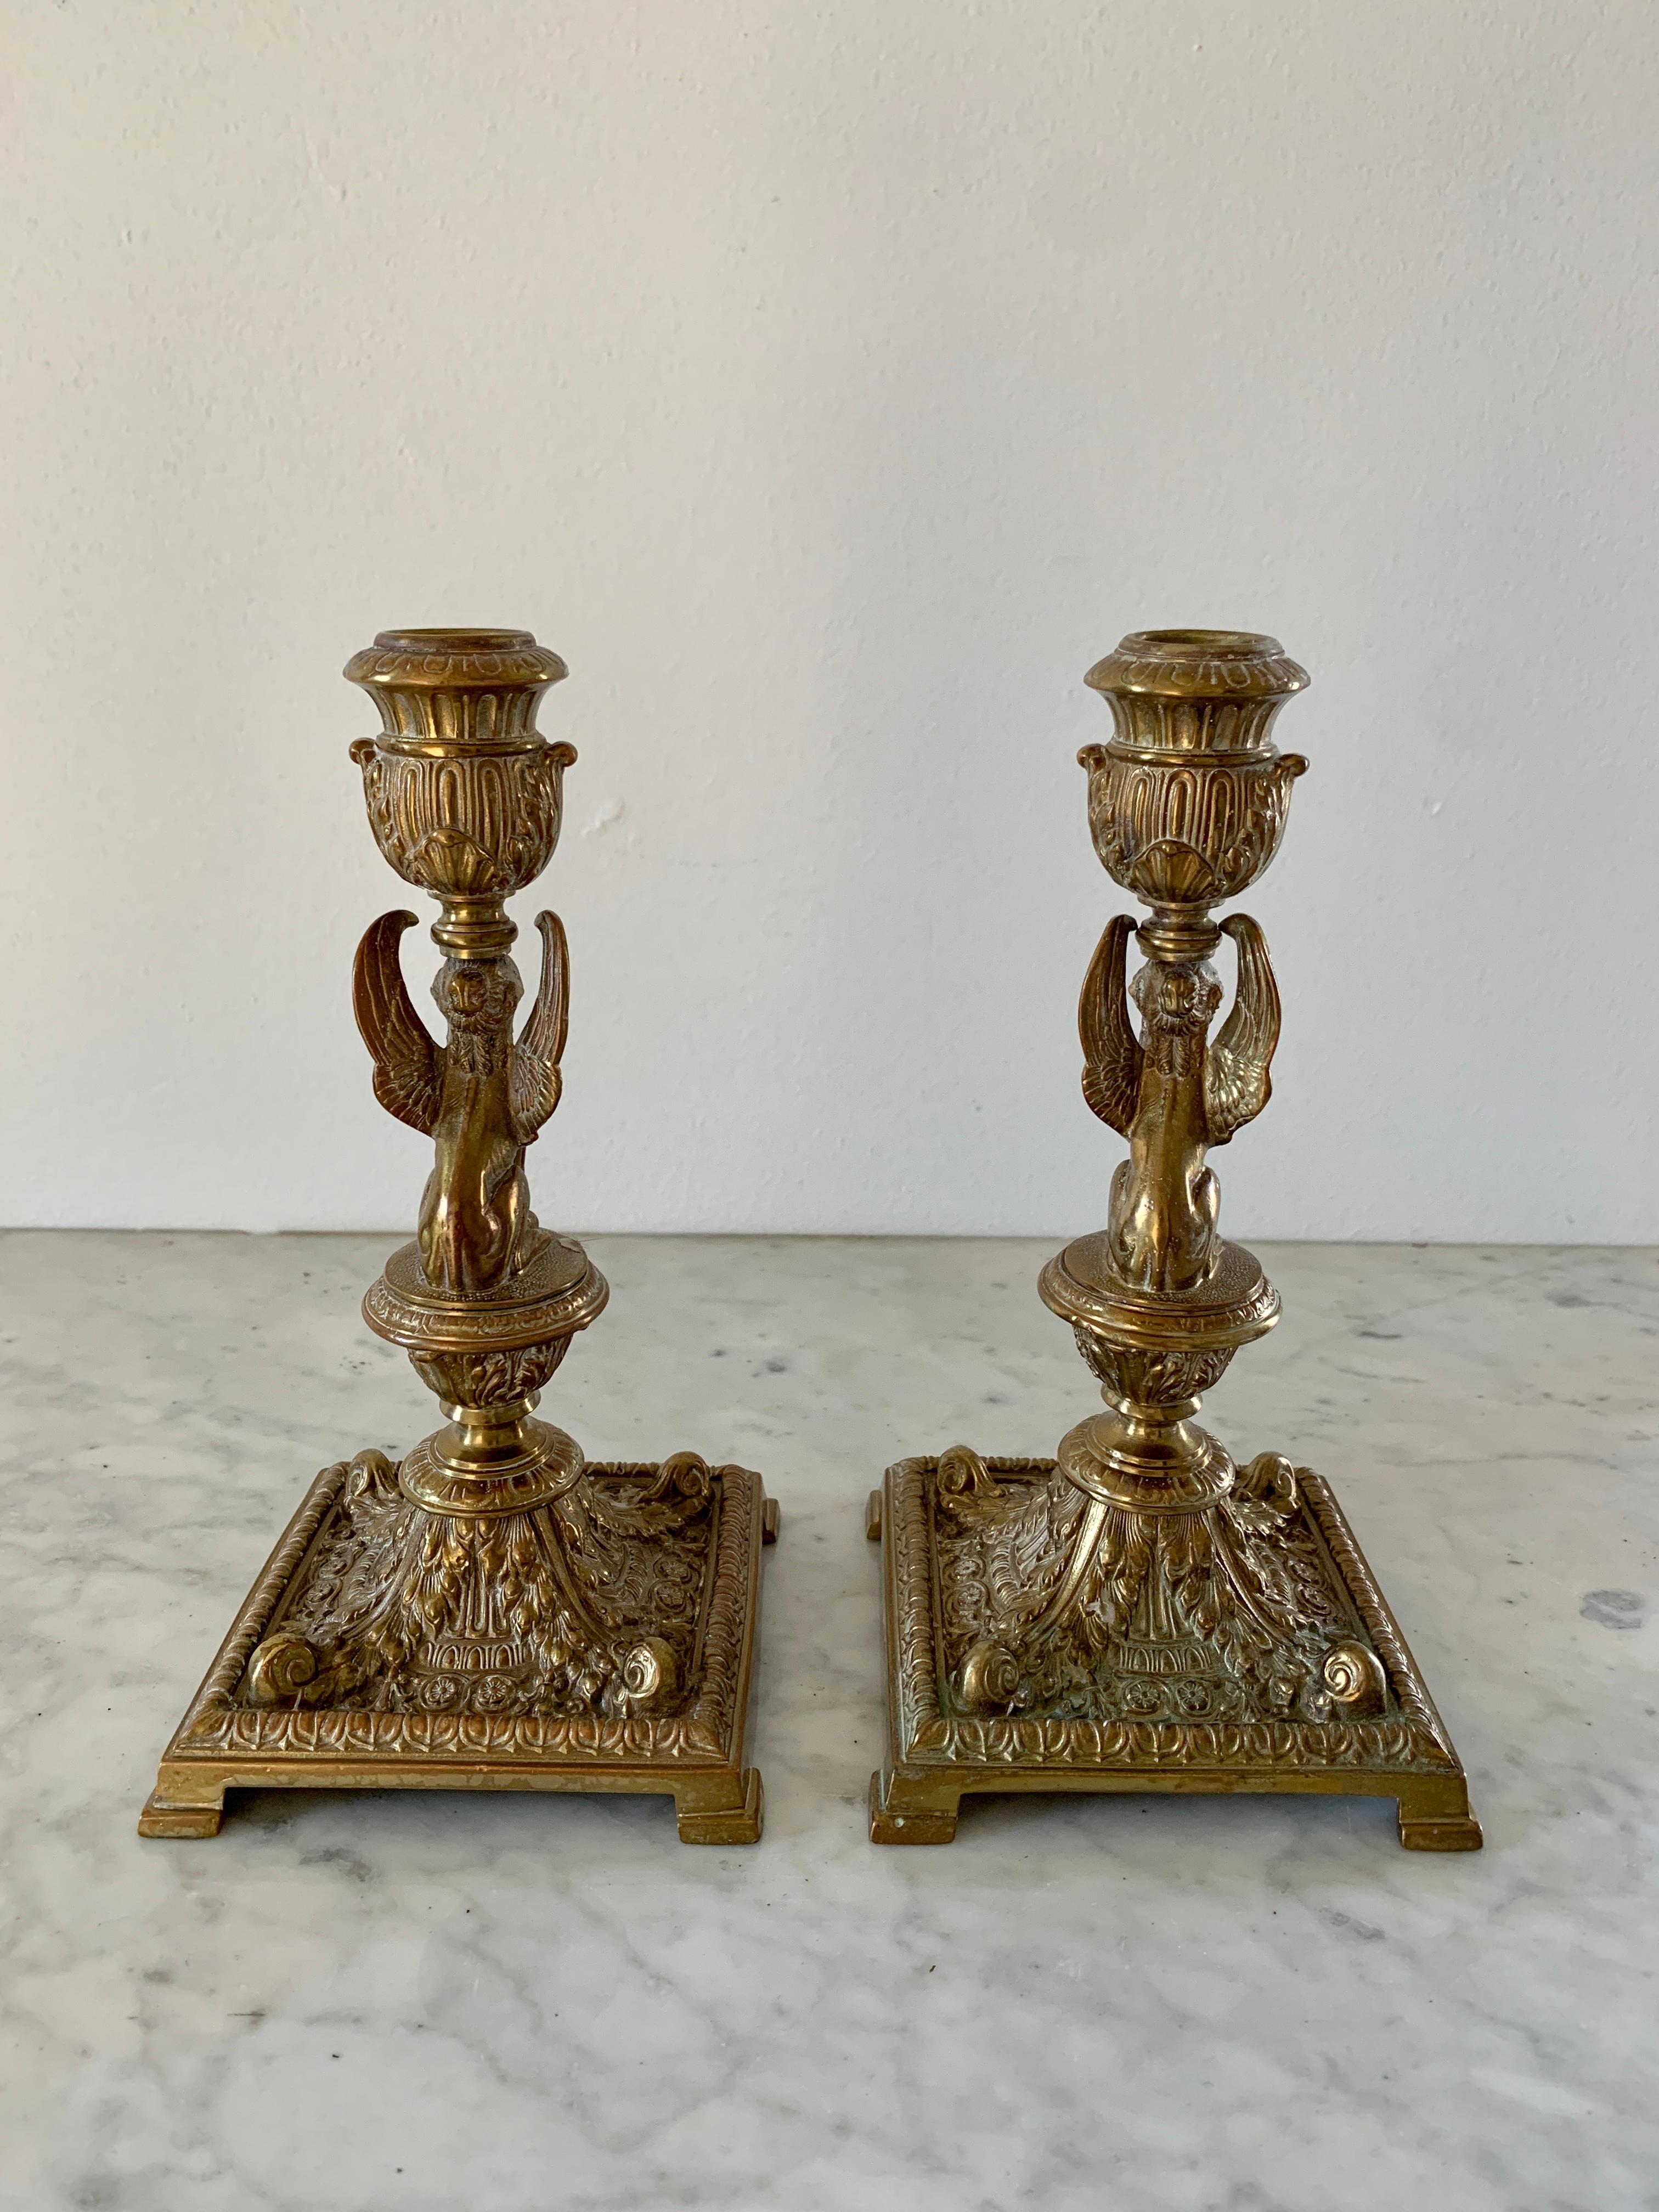 19th Century Egyptian Revival Gilt Bronze Sphinx Candlestick Holders, Pair In Good Condition For Sale In Elkhart, IN